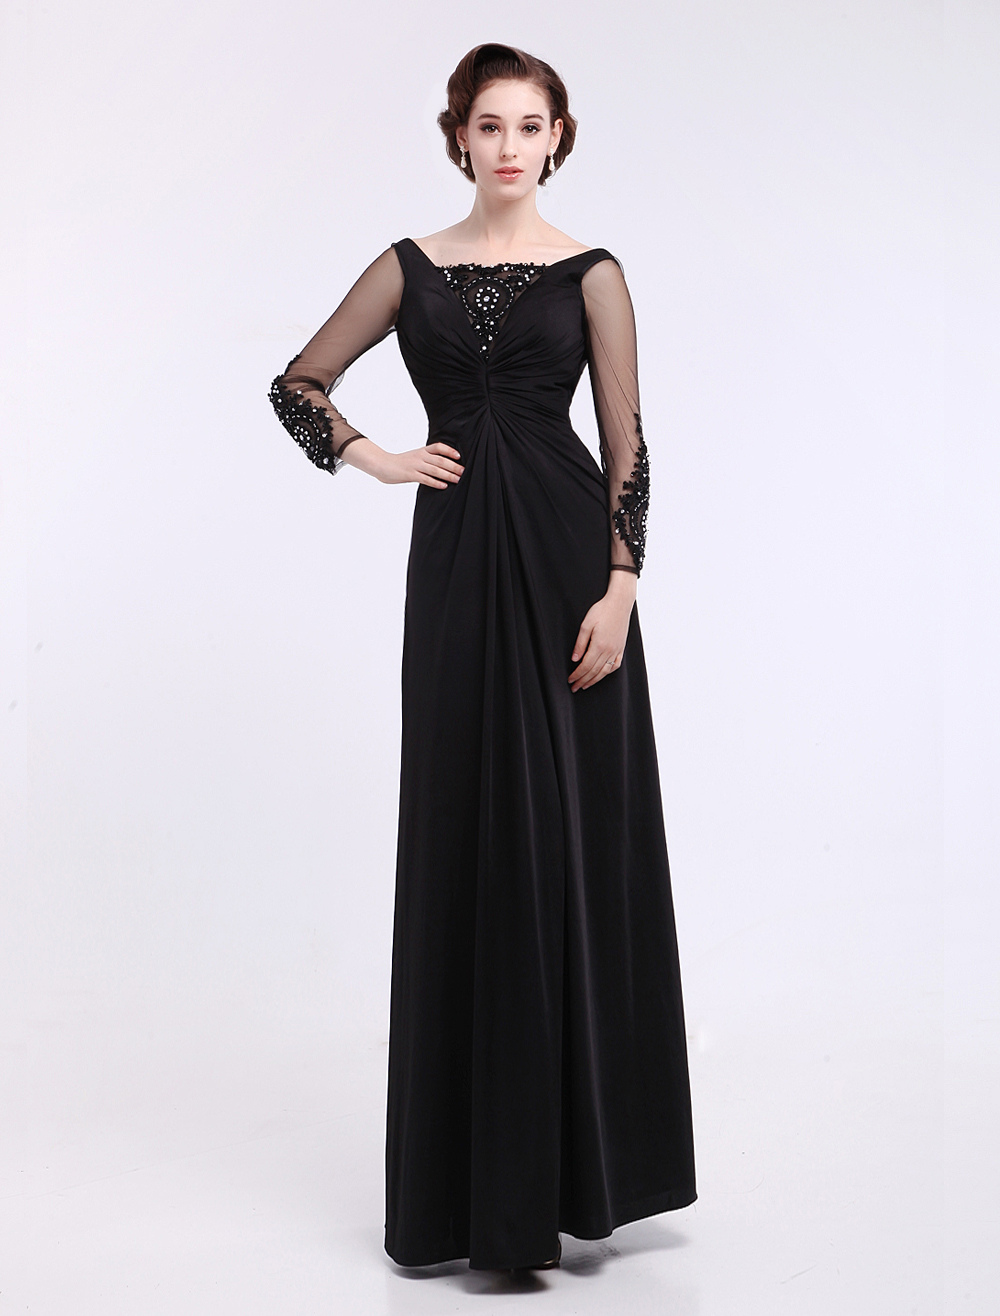 Black A-line Ruched Long Sleeves Beautiful Fashion Dress For Mother of the Bride Milanoo (Wedding) photo